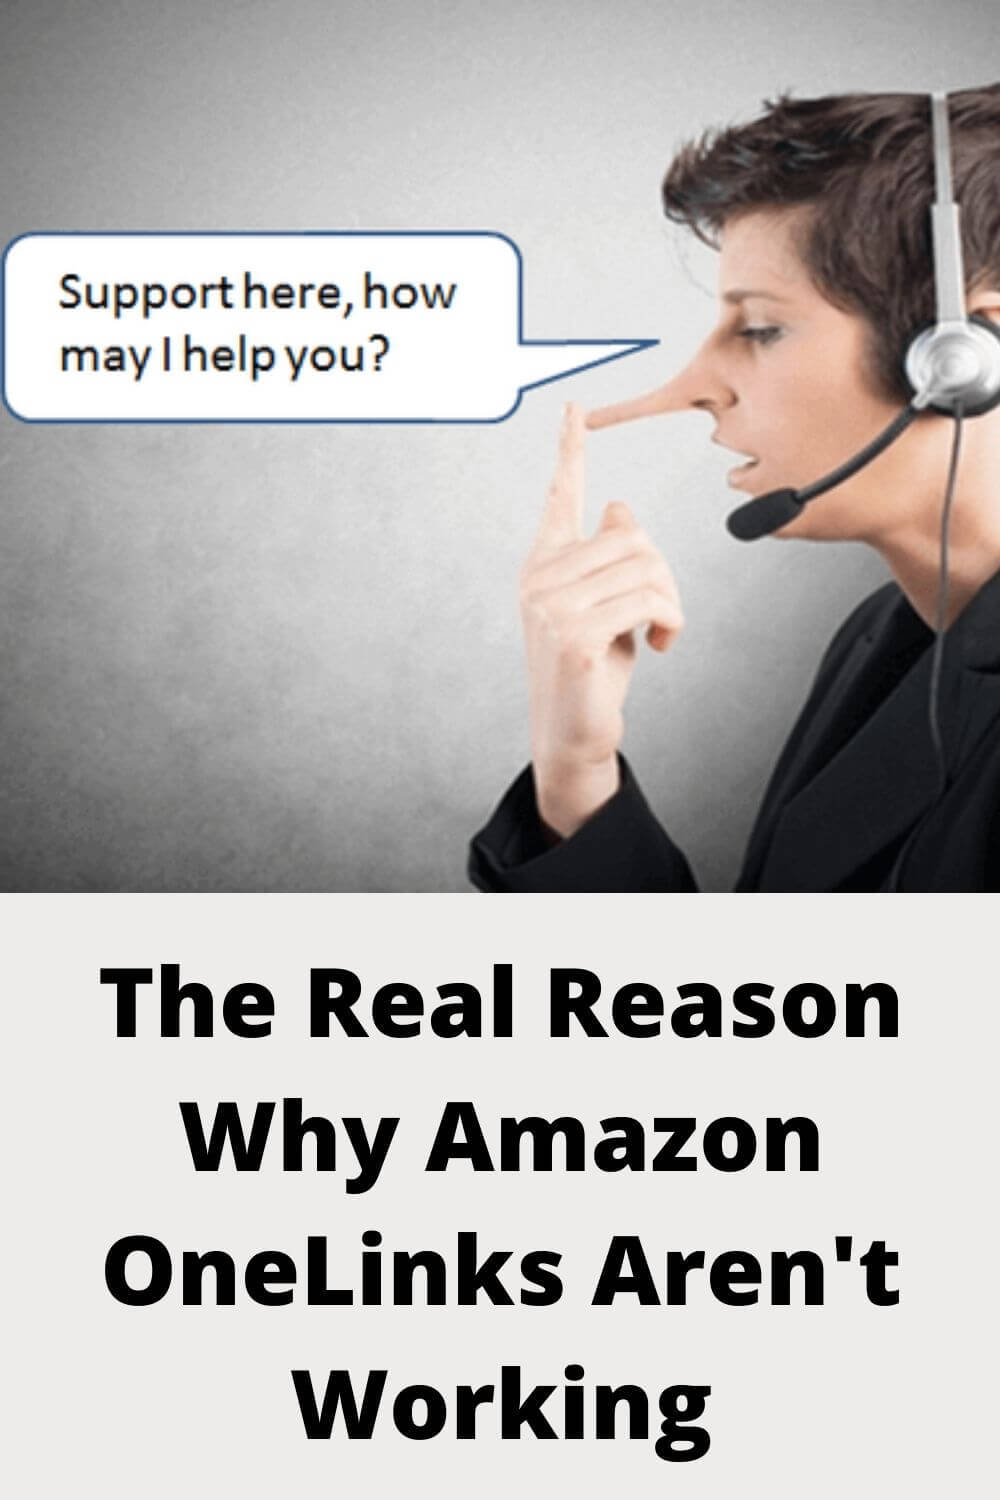 the real reason why Amazon OneLinks aren't working